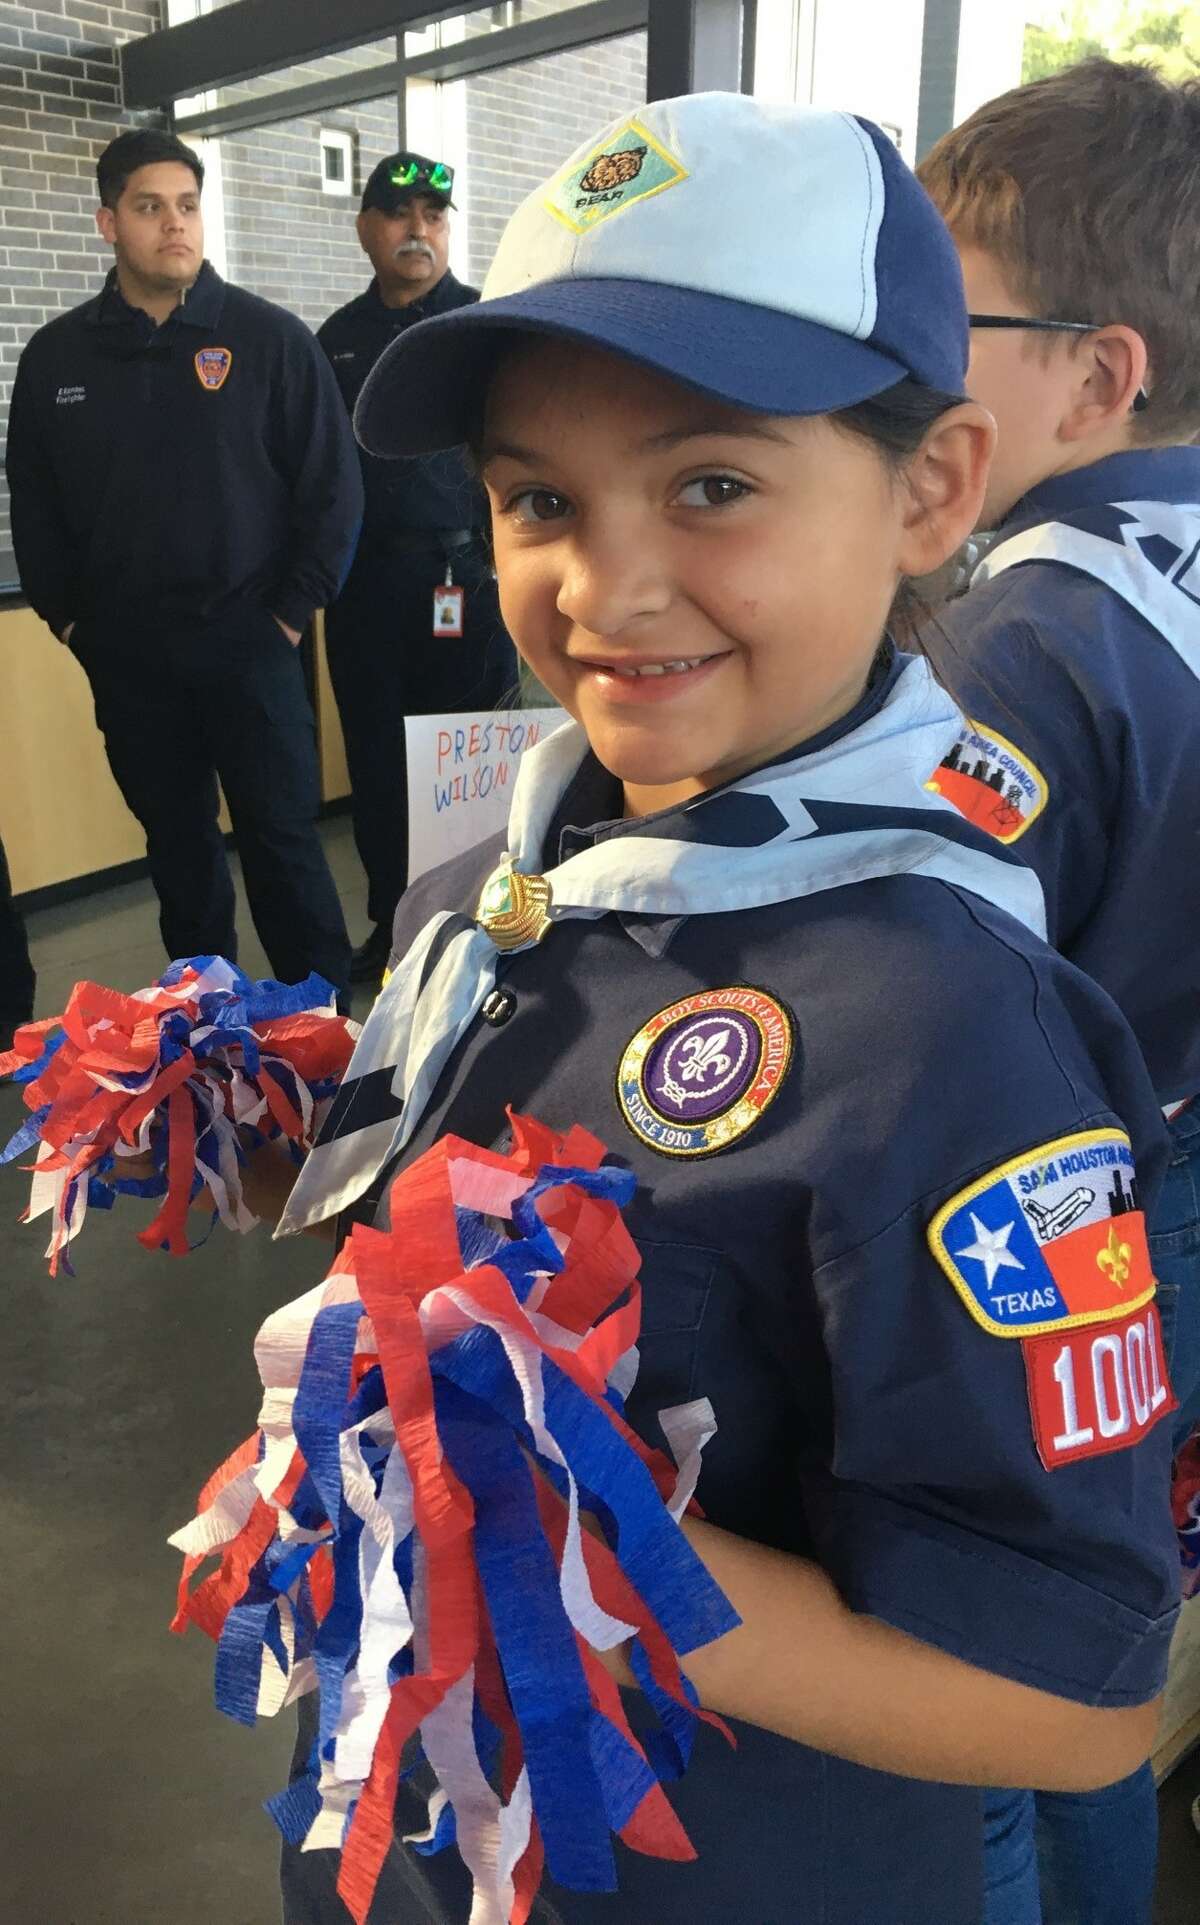 Cub Scout Foster Tujague, 8, of Pack 1001 was among those cheering new military recruits at the Texans Embracing America's Military send-off on Nov. 10 in Katy.